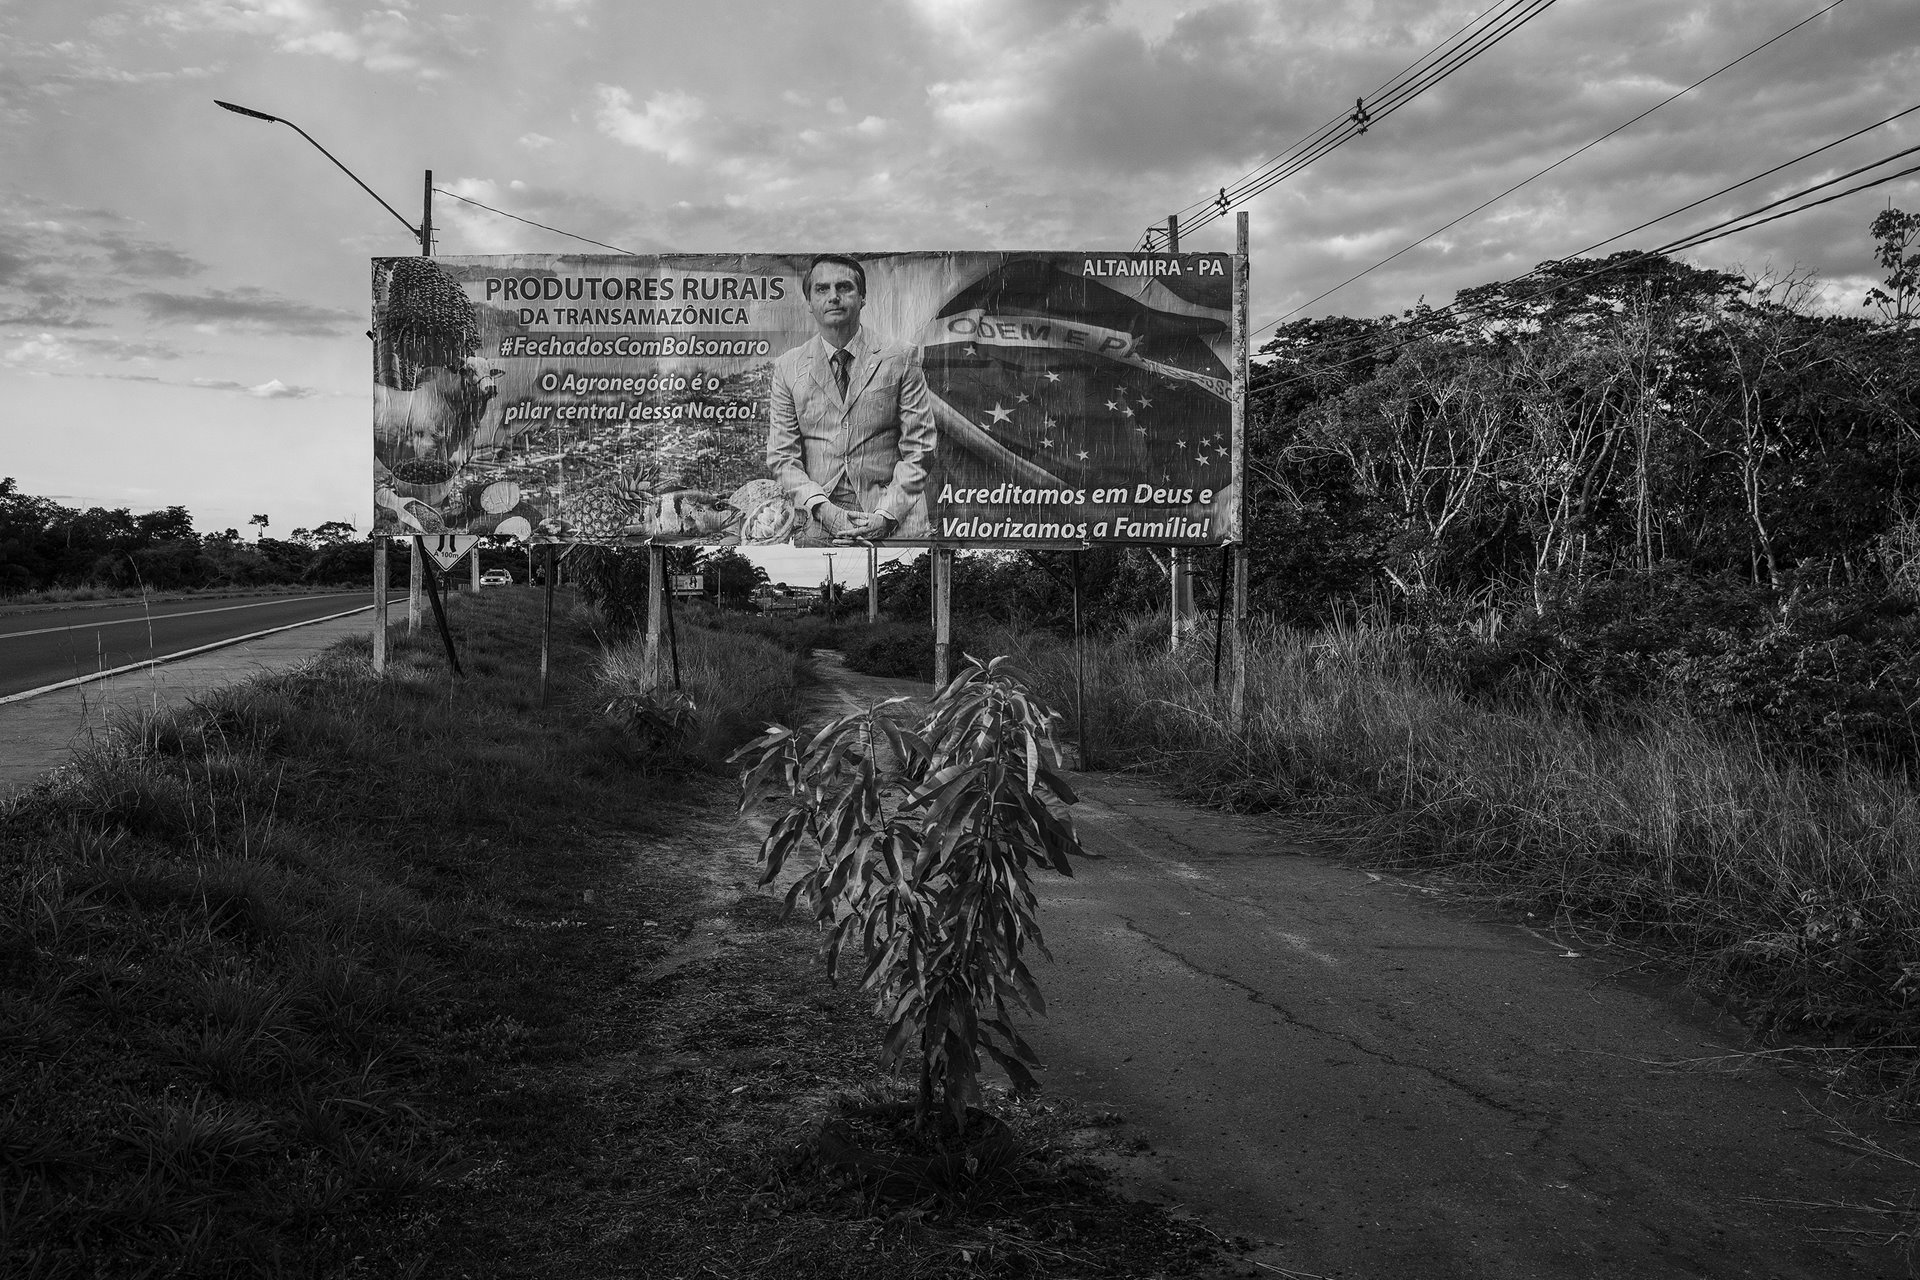 <p>A billboard with a message of support to President Bolsonaro stands alongside the Trans-Amazonian Highway, Altamira, Pará, Brazil. It was financed by local farmers. Agribusiness is one of the president&rsquo;s main pillars of political support.</p>
